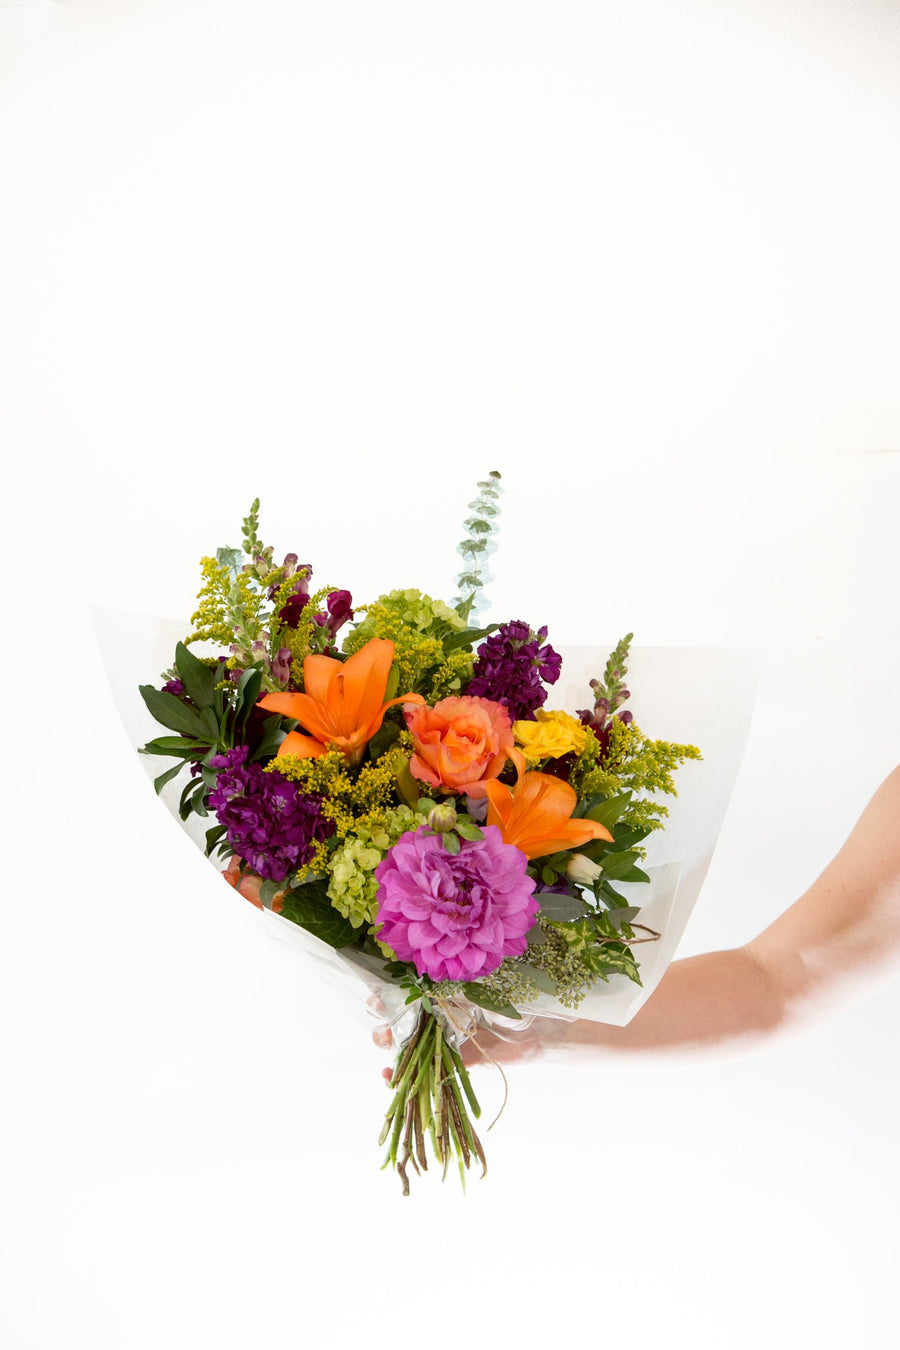 Floral subscription Bright and Colorful handed bouquet - medium $75